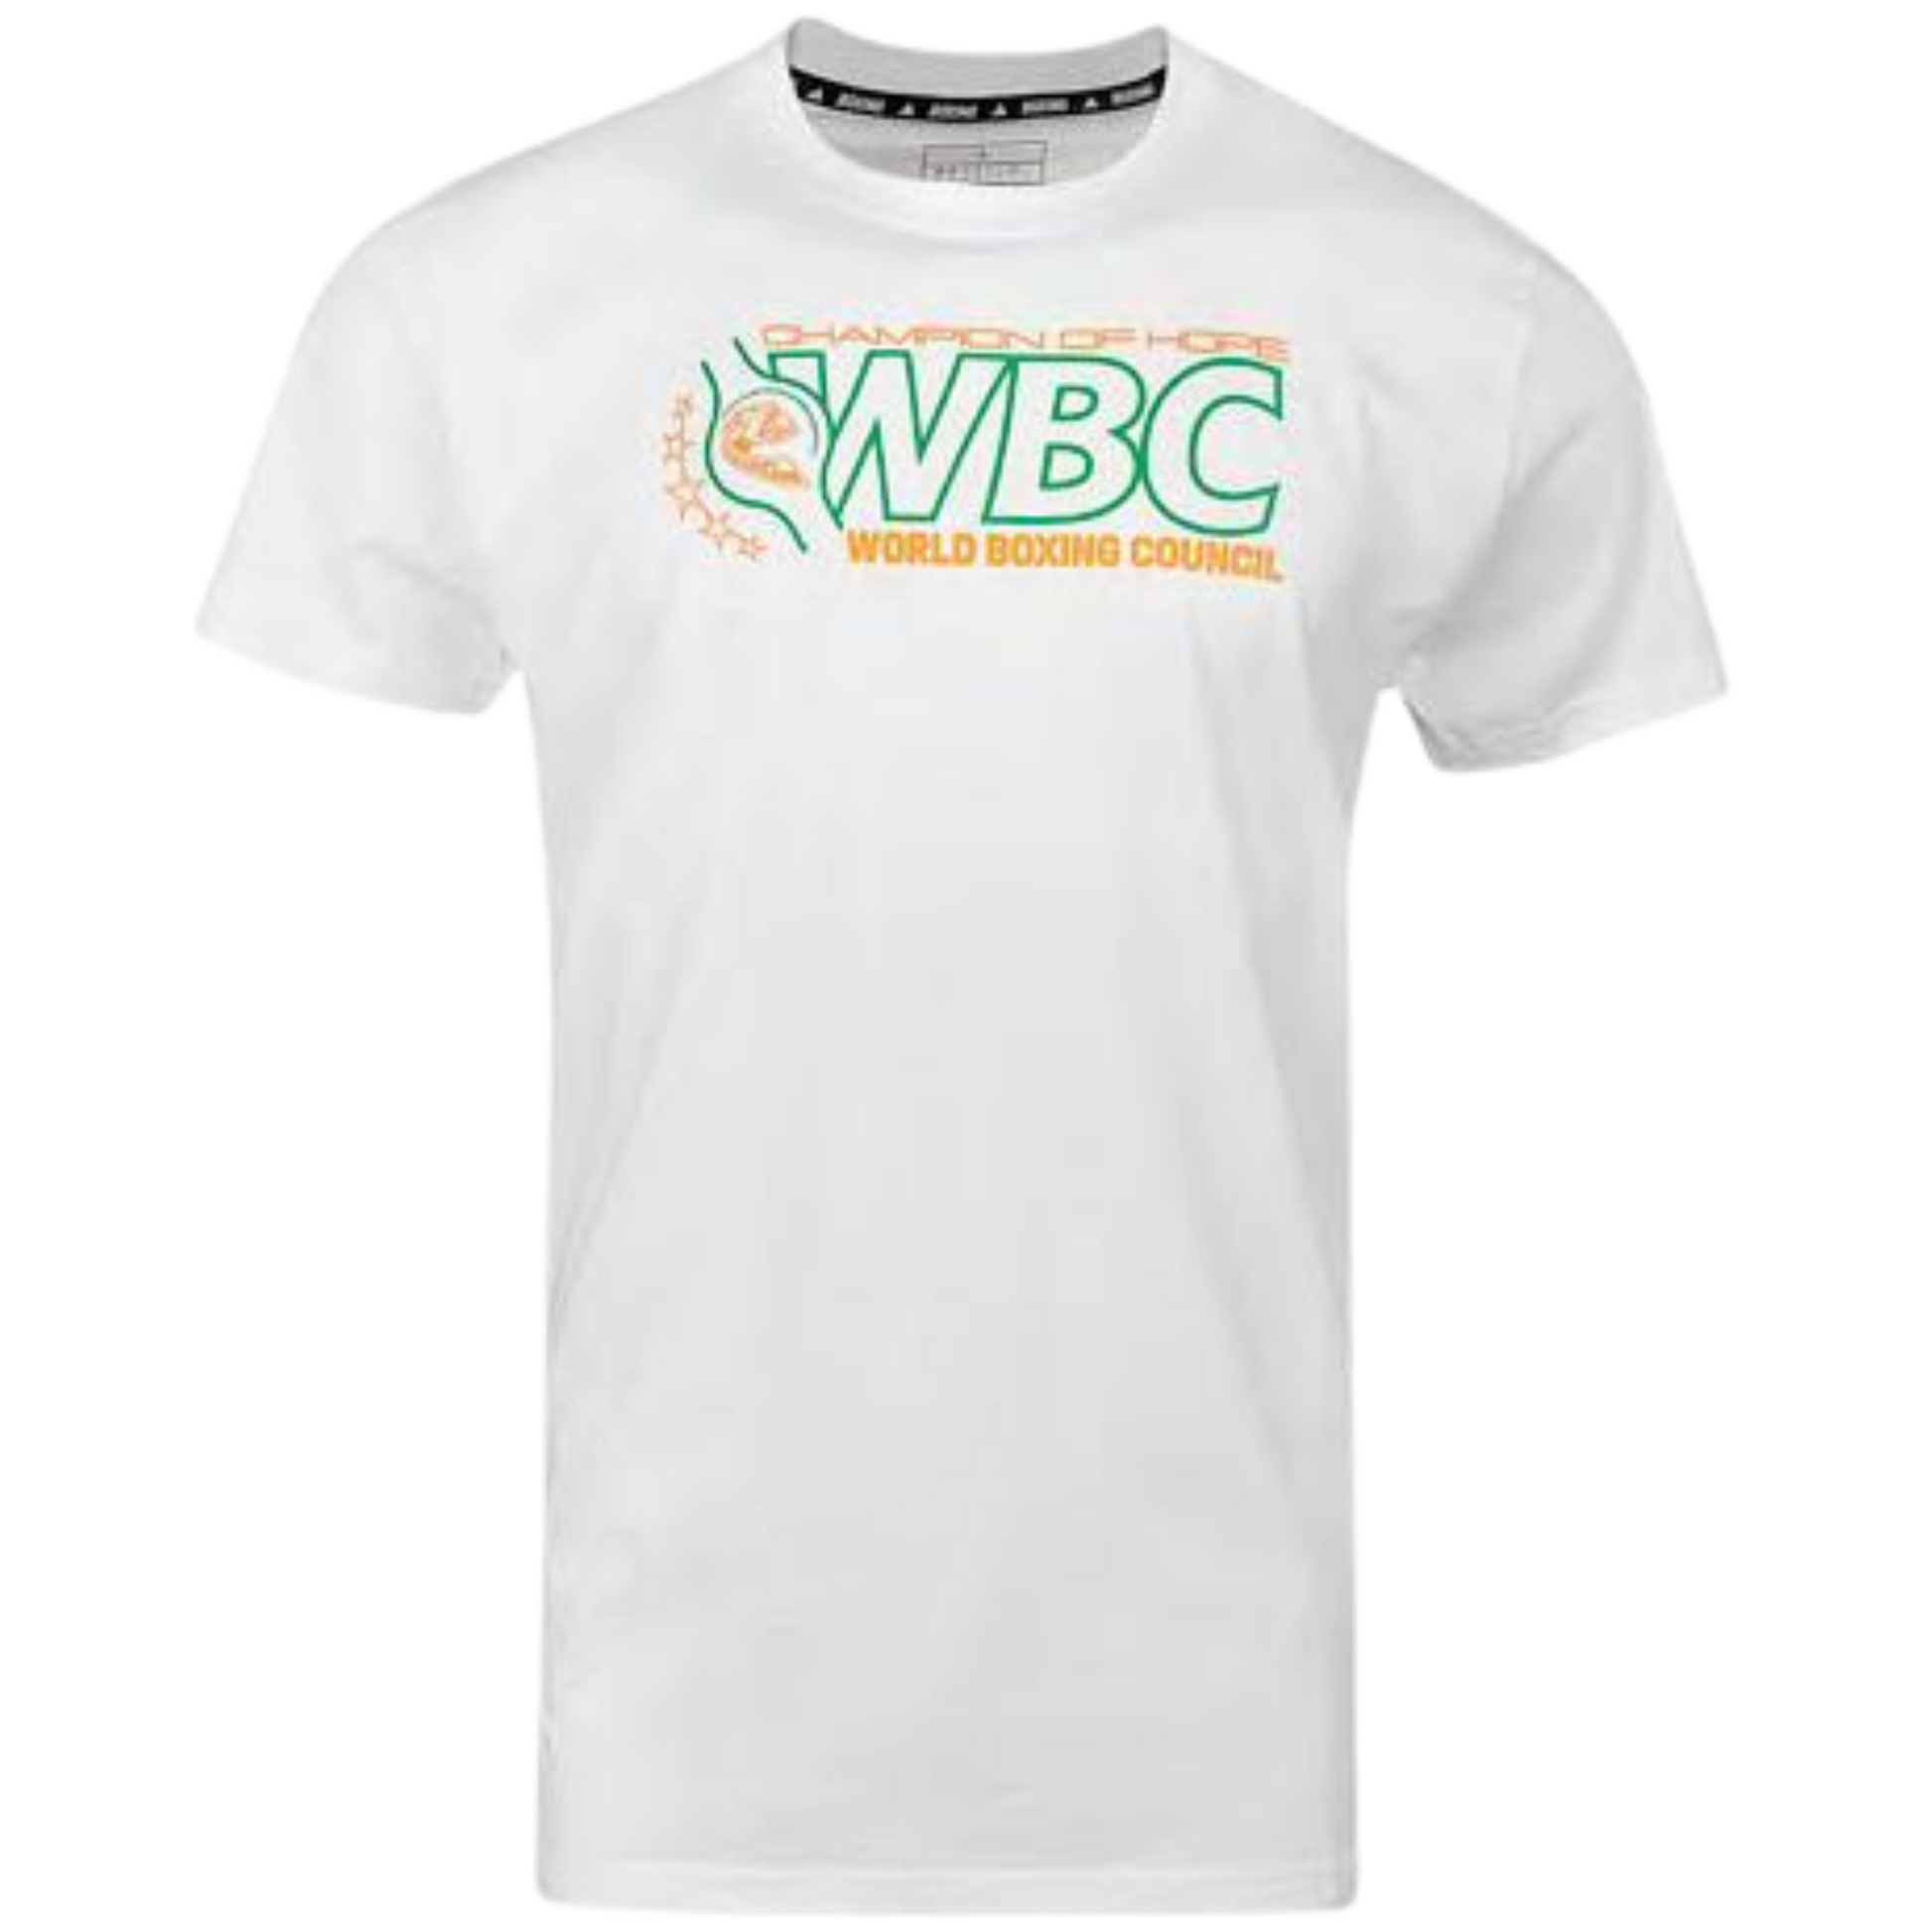 Adidas Adiwbcts1 Wbc Approved Tee White 01